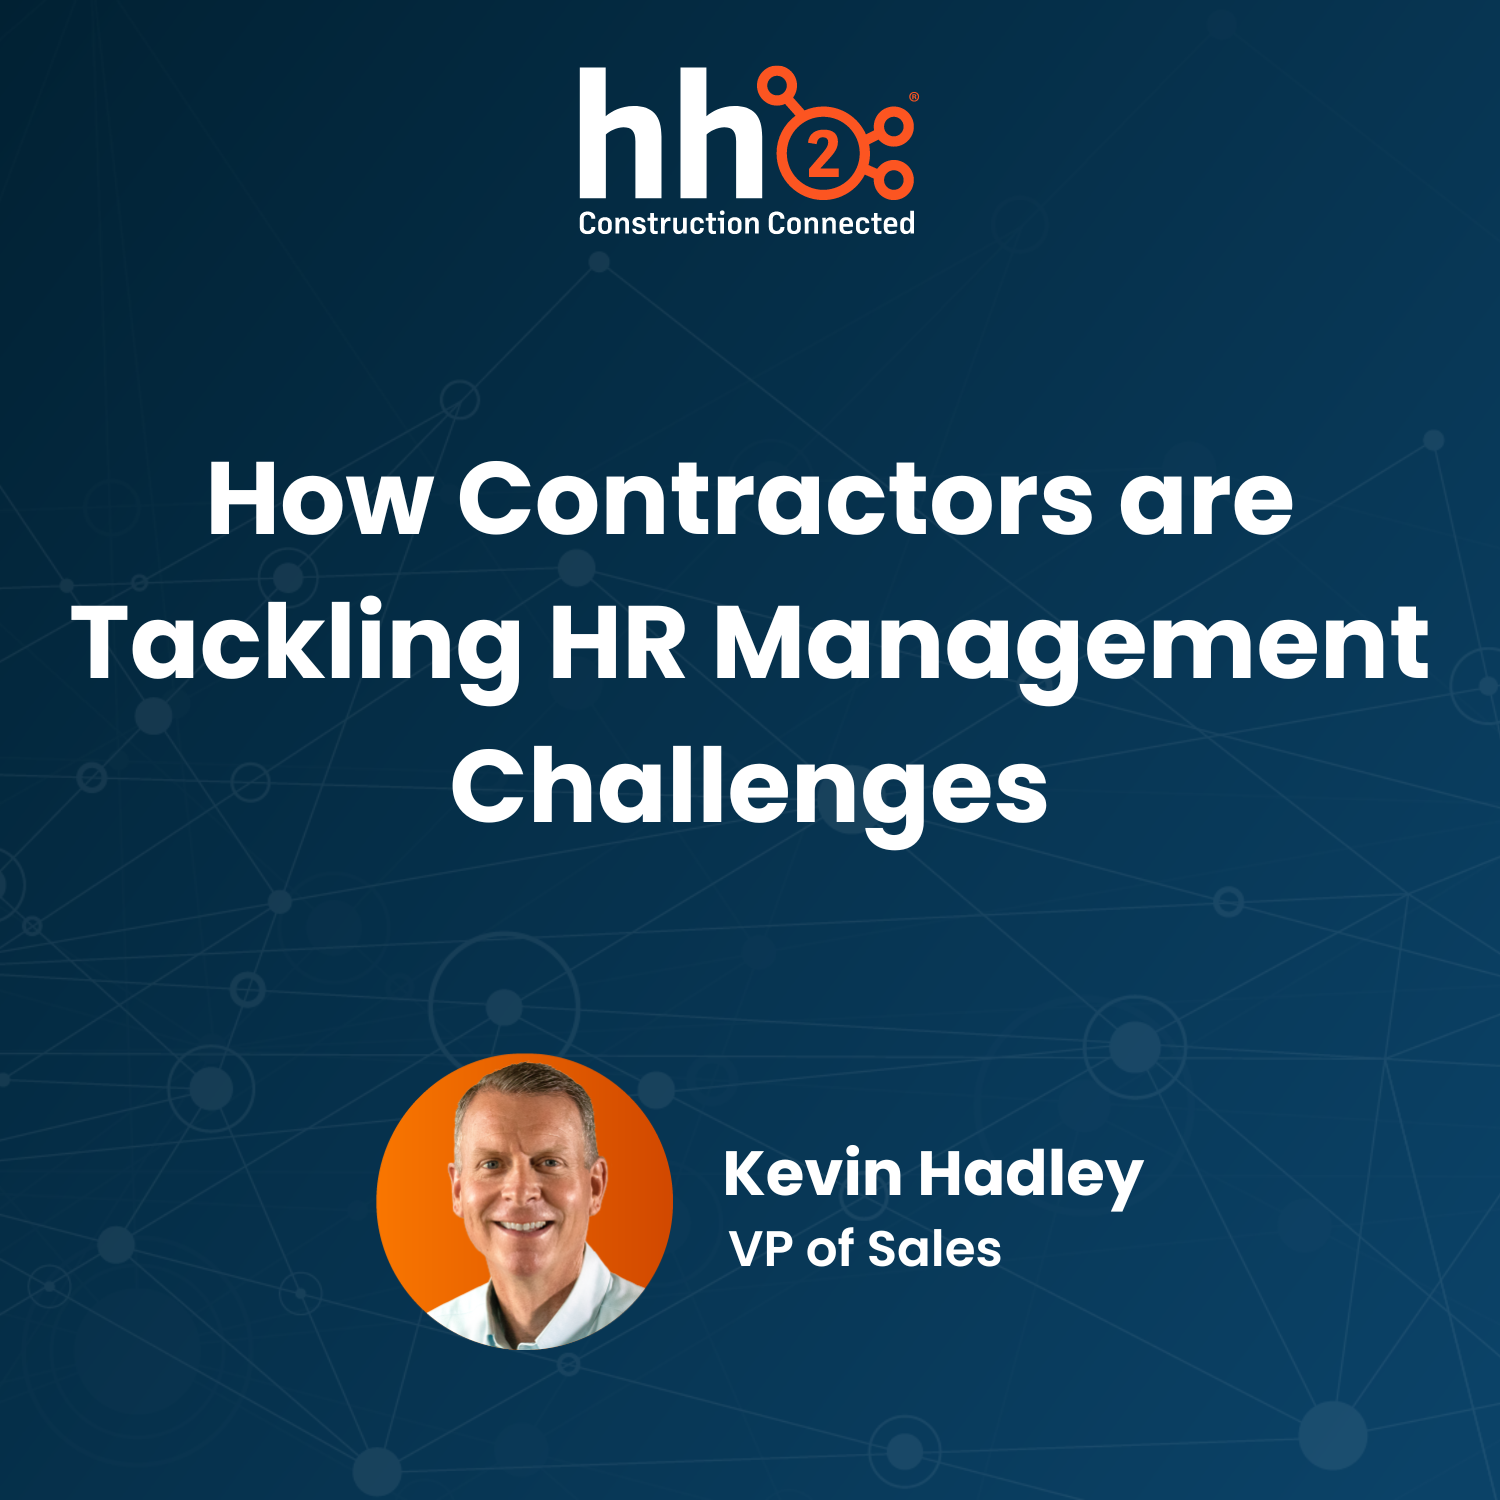 Title - How Contractors are Tackling HR Management Challenges